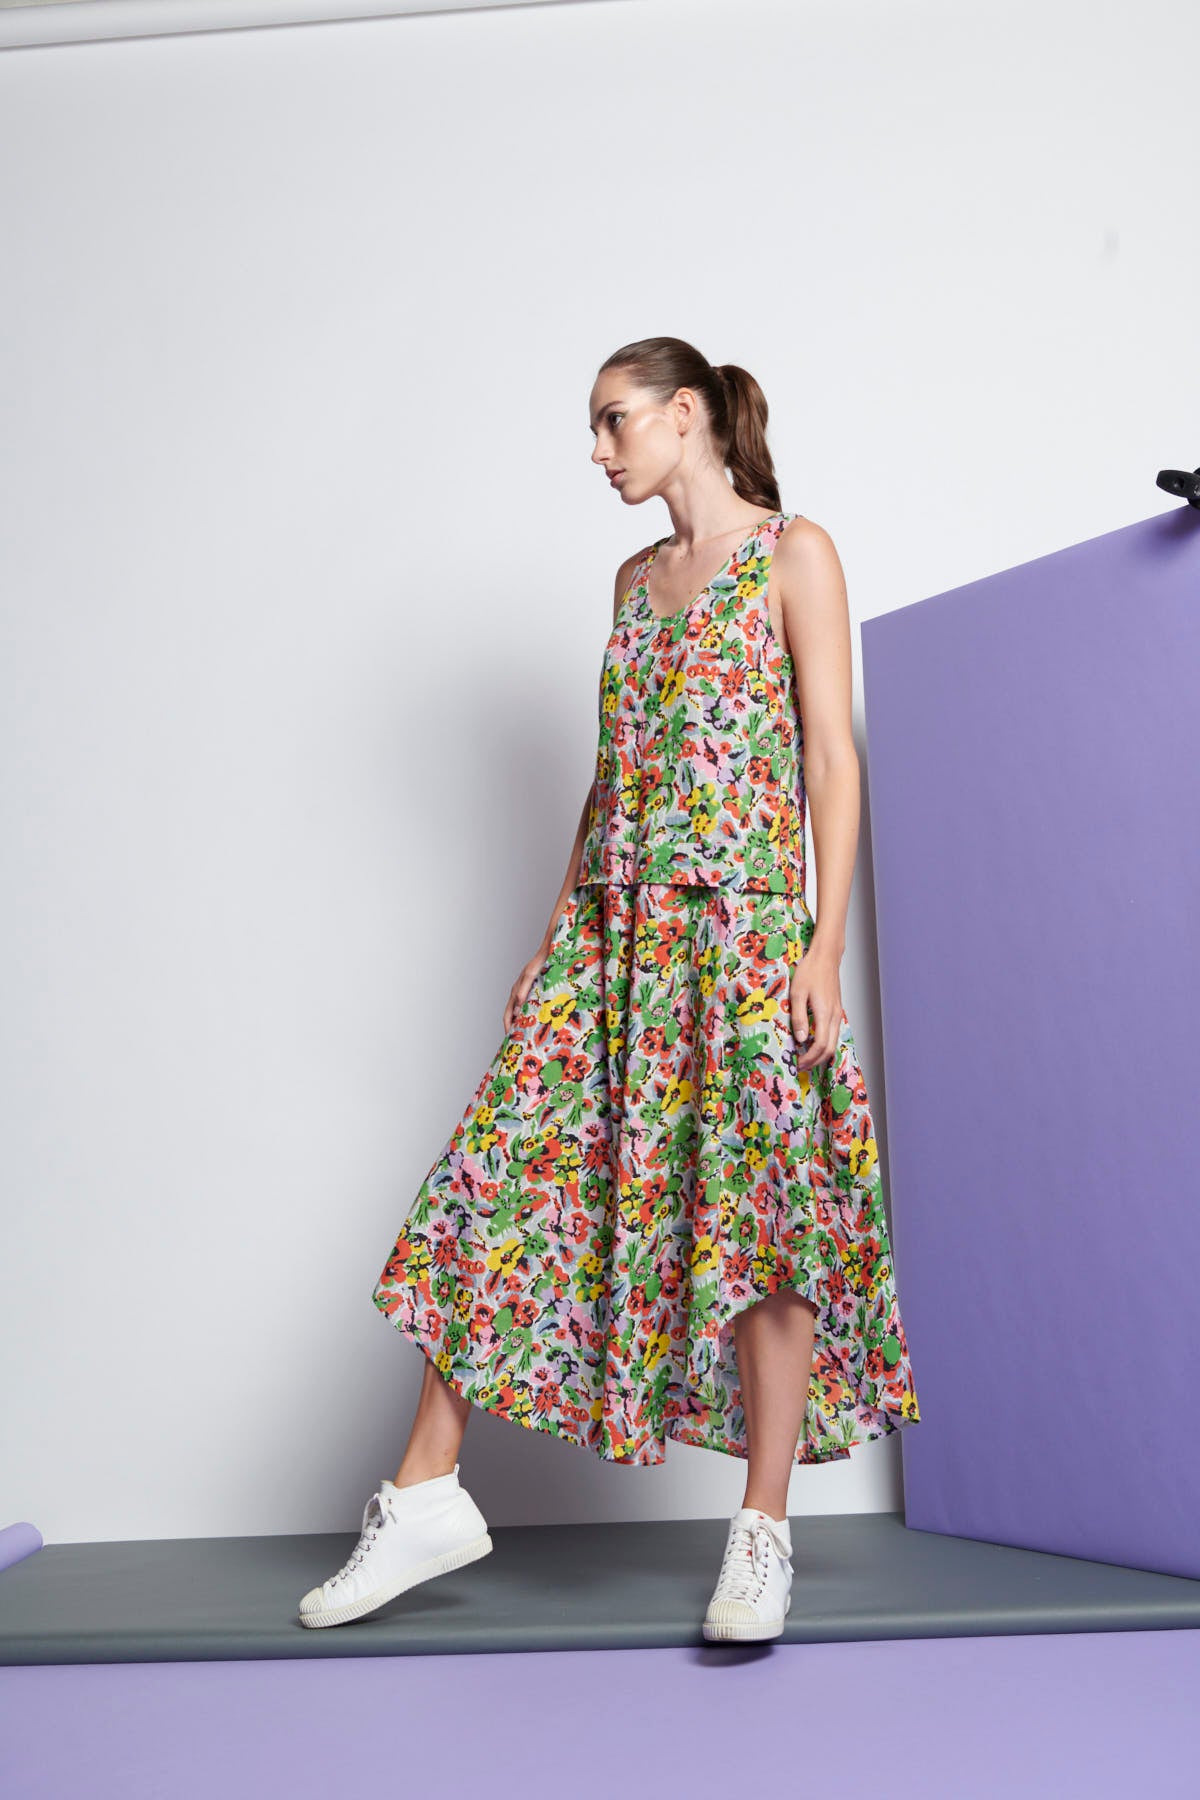 A floral, sleeveless dress that has a round neckline, dropped waist and cascading hem towards the middle